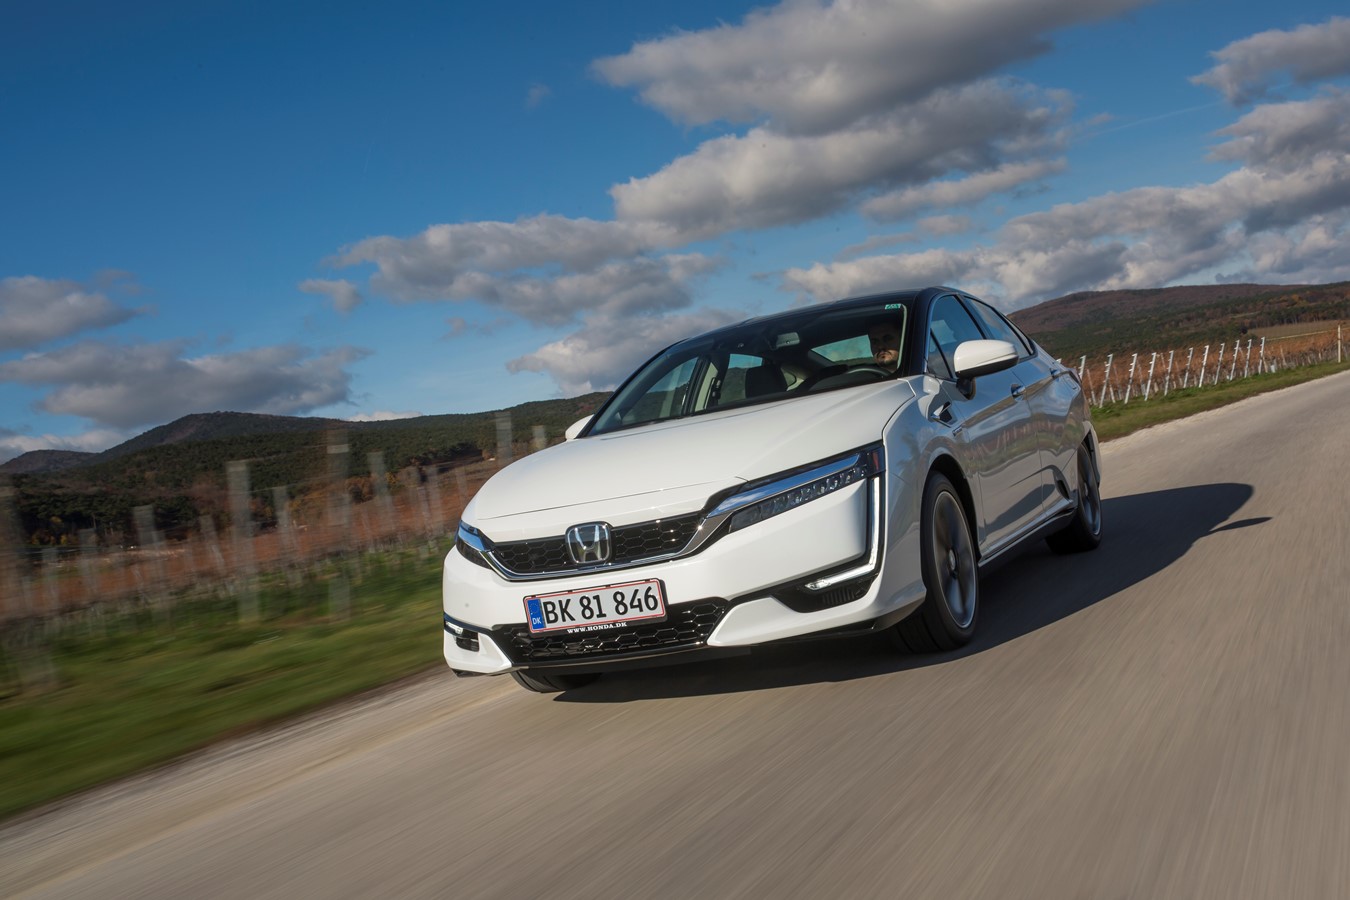 Honda’s Clarity Fuel Cell vehicles to provide zero-emissions shuttle at COP23